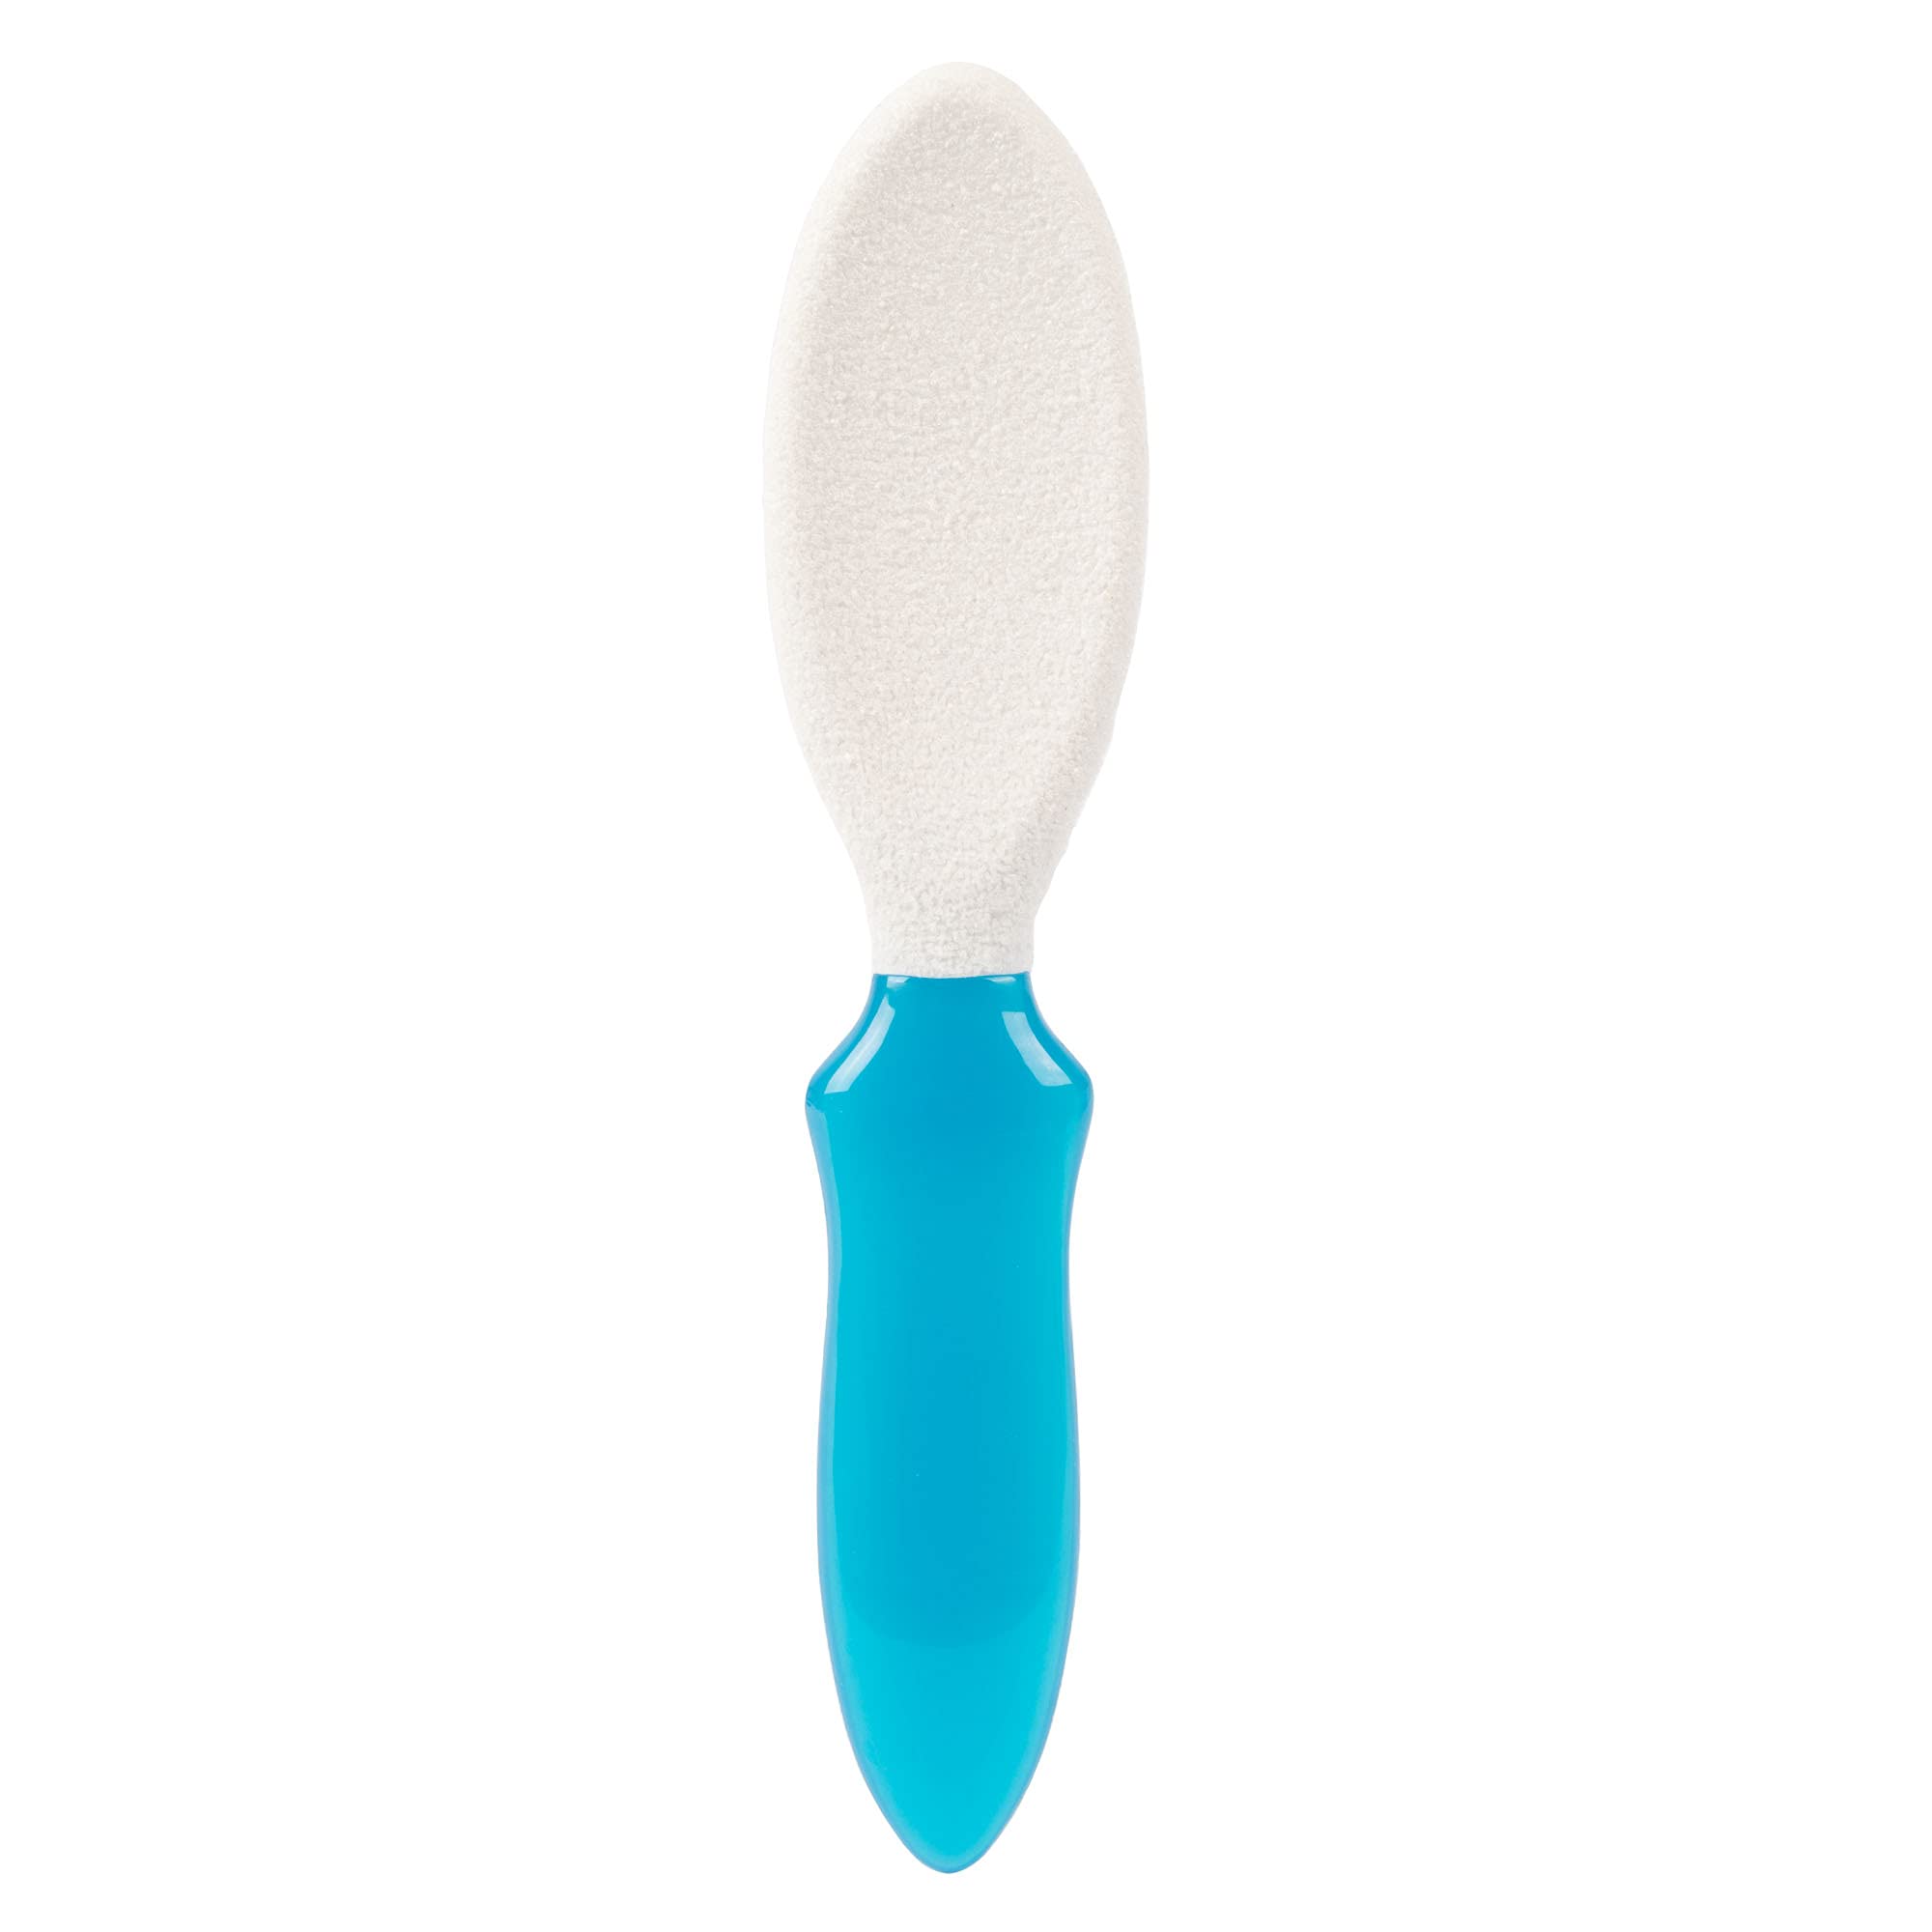 Simply Foot Exfoliating Stone Foot File - Shop Manicure & Pedicure Tools at  H-E-B